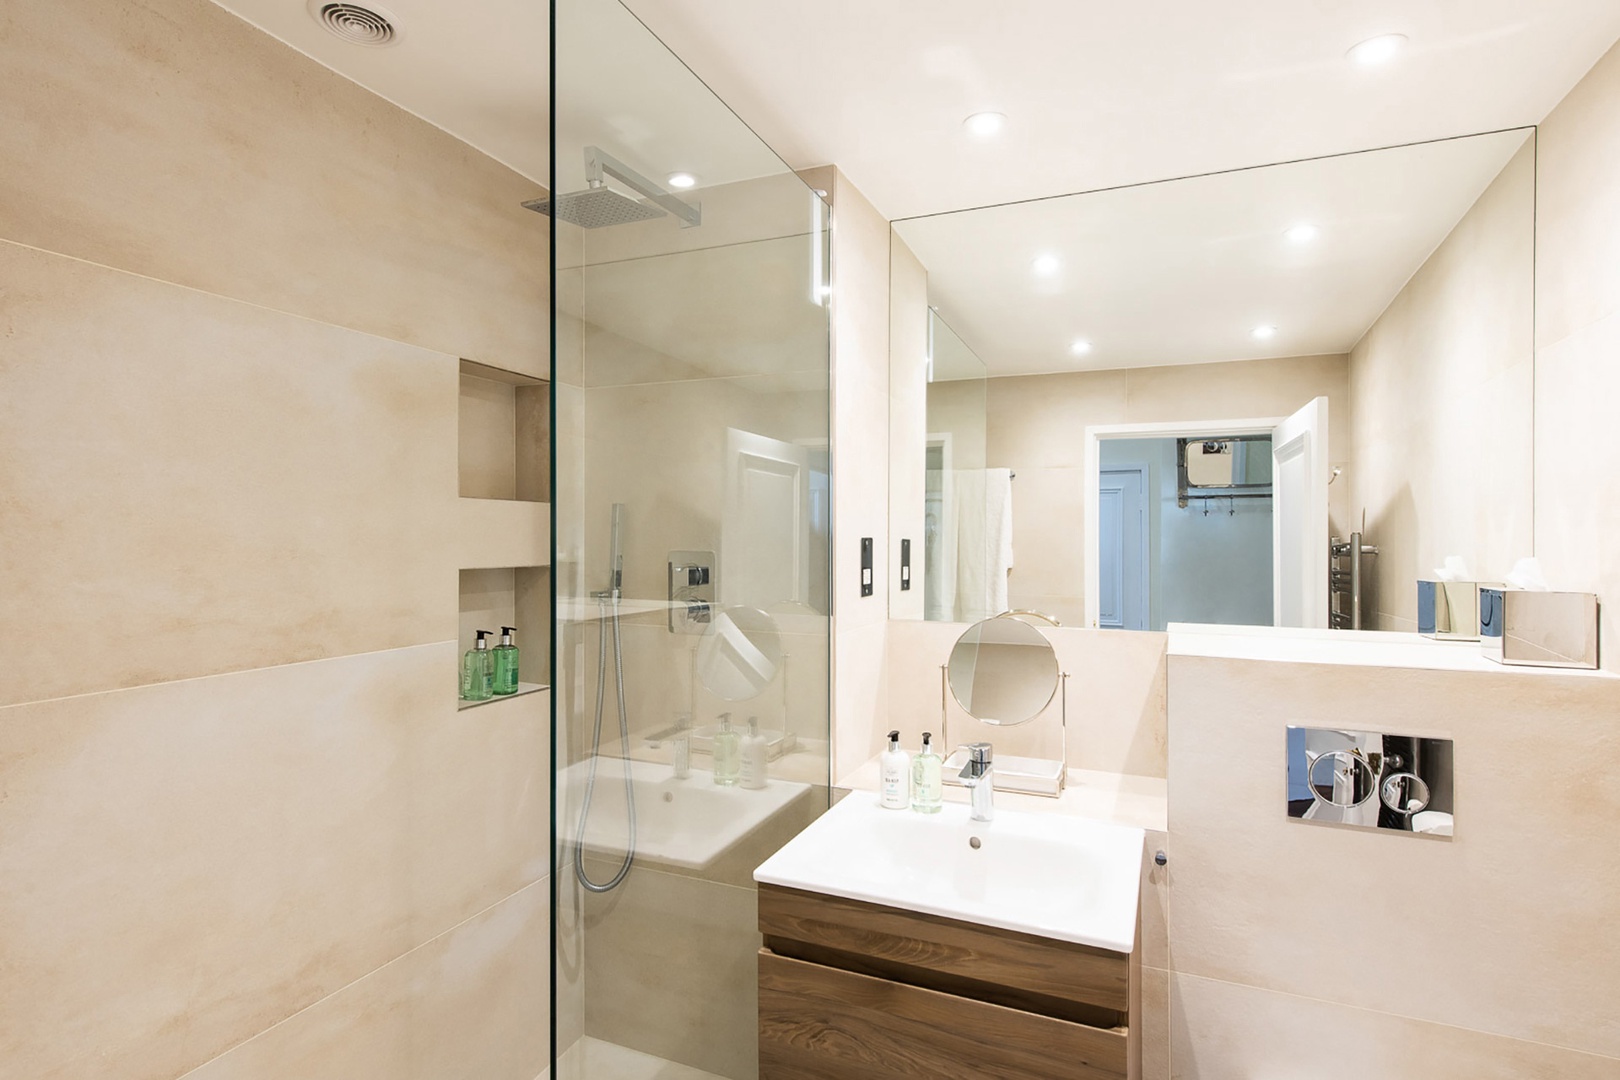 Large mirrors and storage in the bathroom.